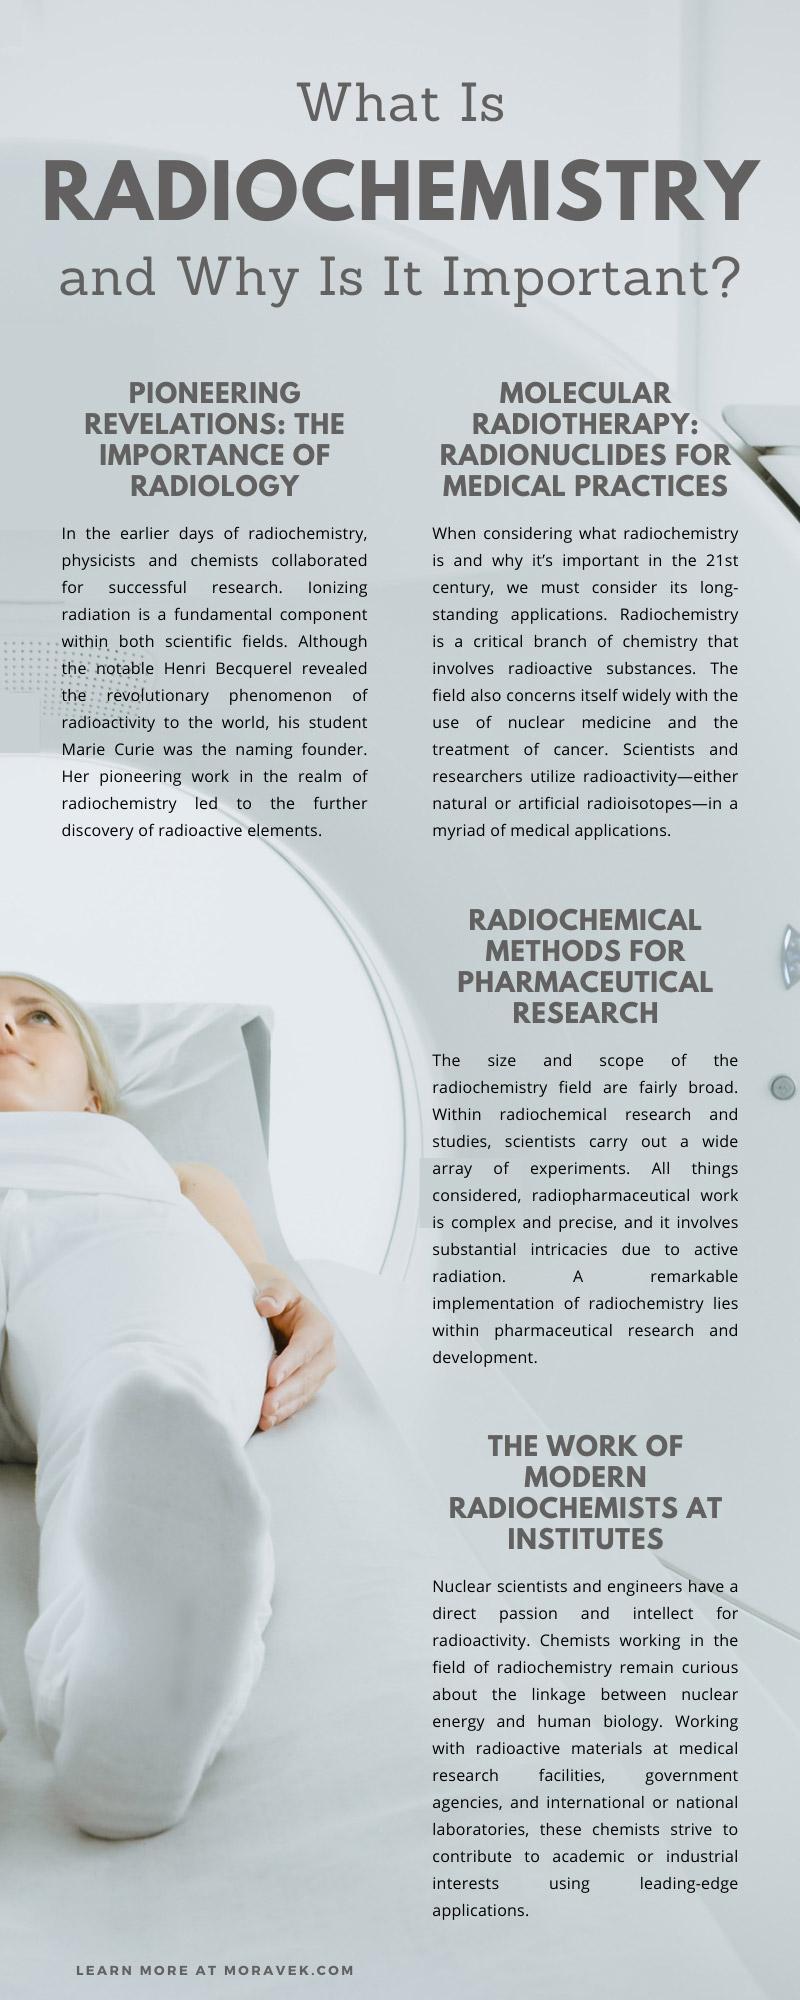 What Is Radiochemistry and Why Is It Important?